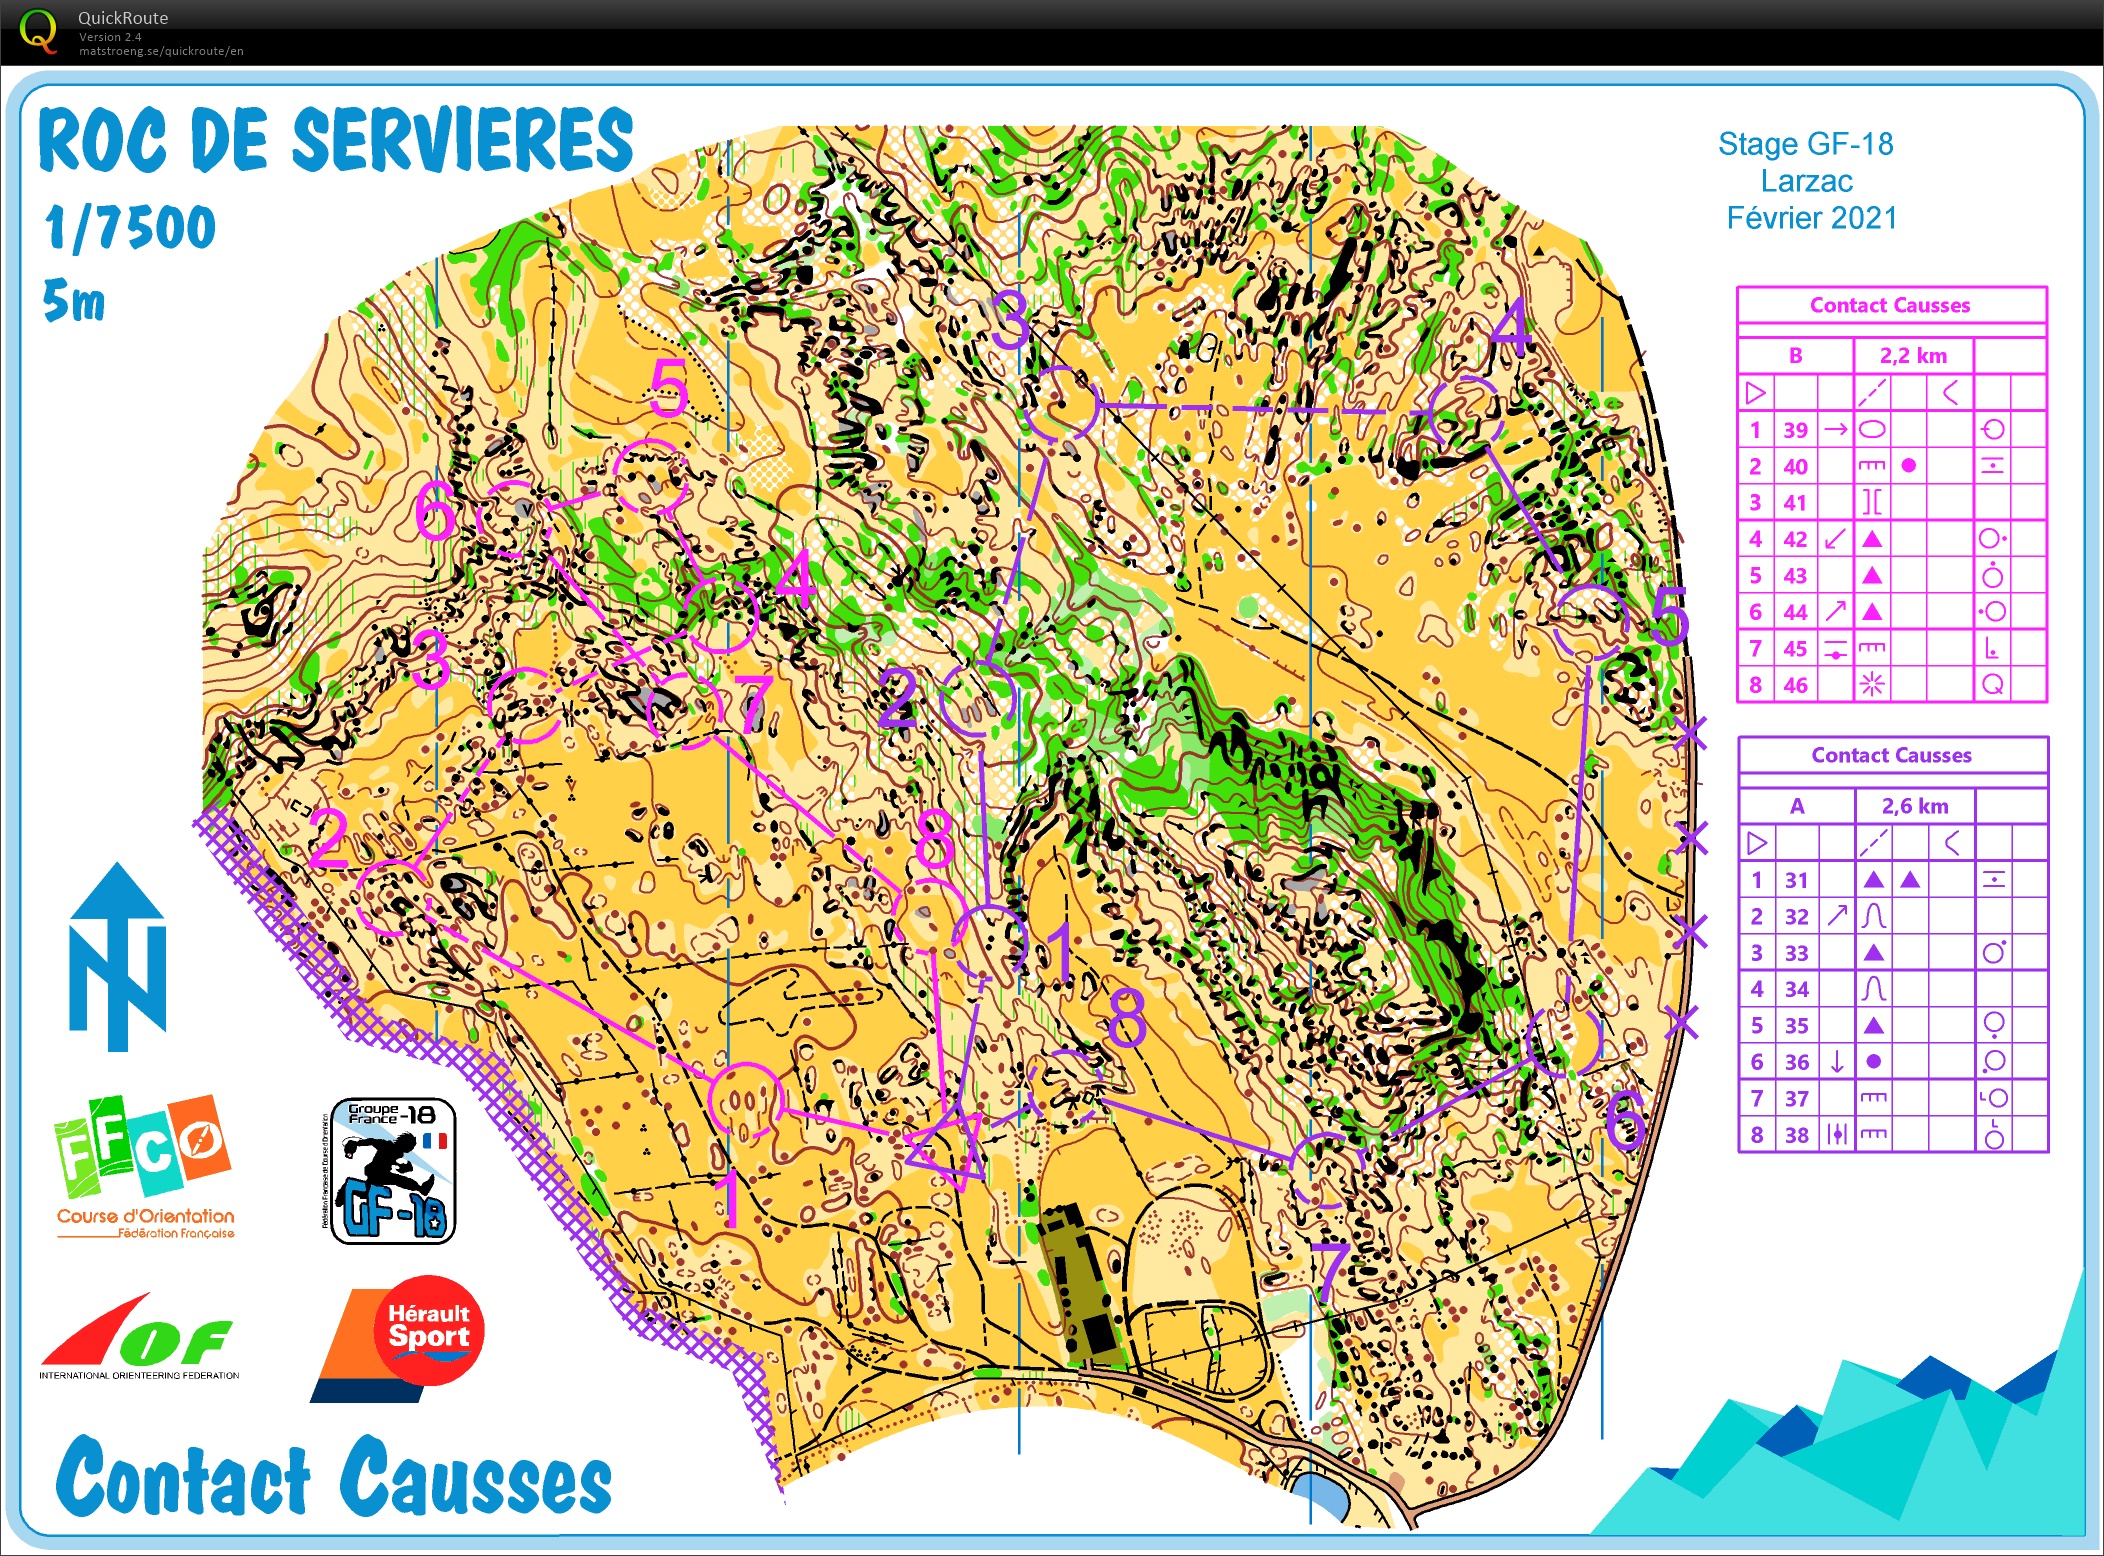 Stage GF-18 Larzac (E2) contact "Causse" (06.02.2021)